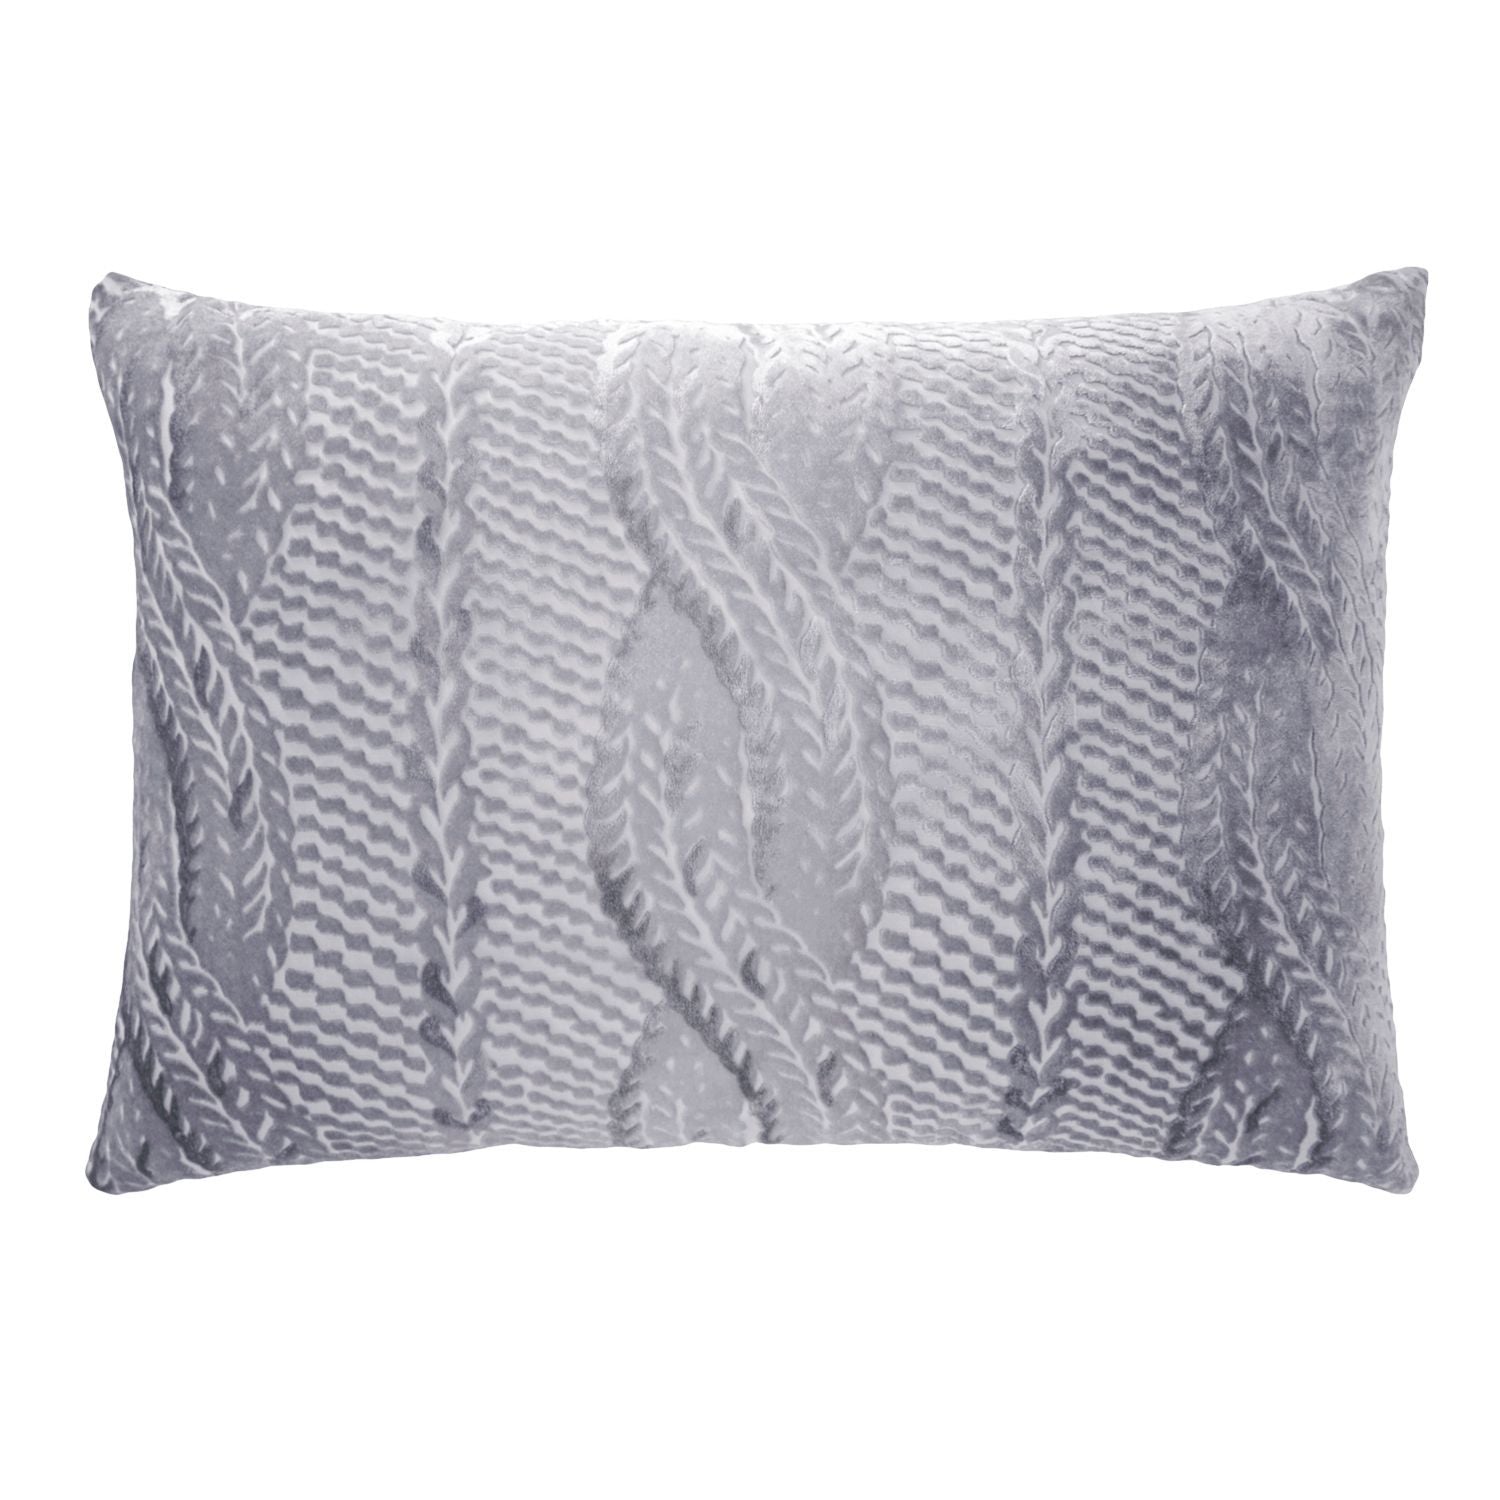 Silver Grey Cable Knit Velvet Pillow by Kevin O'Brien Studio  - Fig Linens